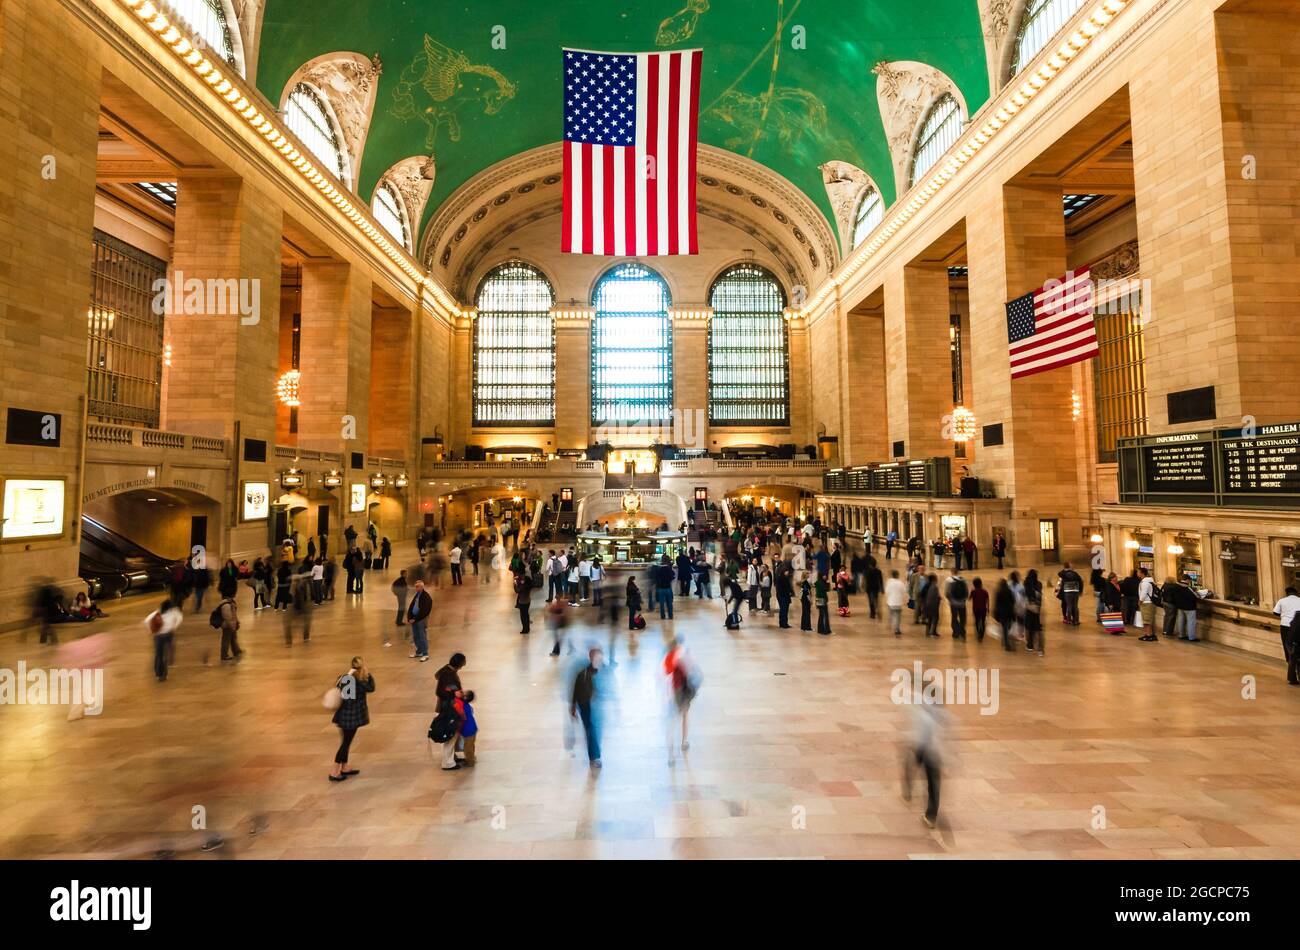 Main Concourse of Grand Central Station (Grand Central Terminus), New York City, NY, États-Unis. Banque D'Images